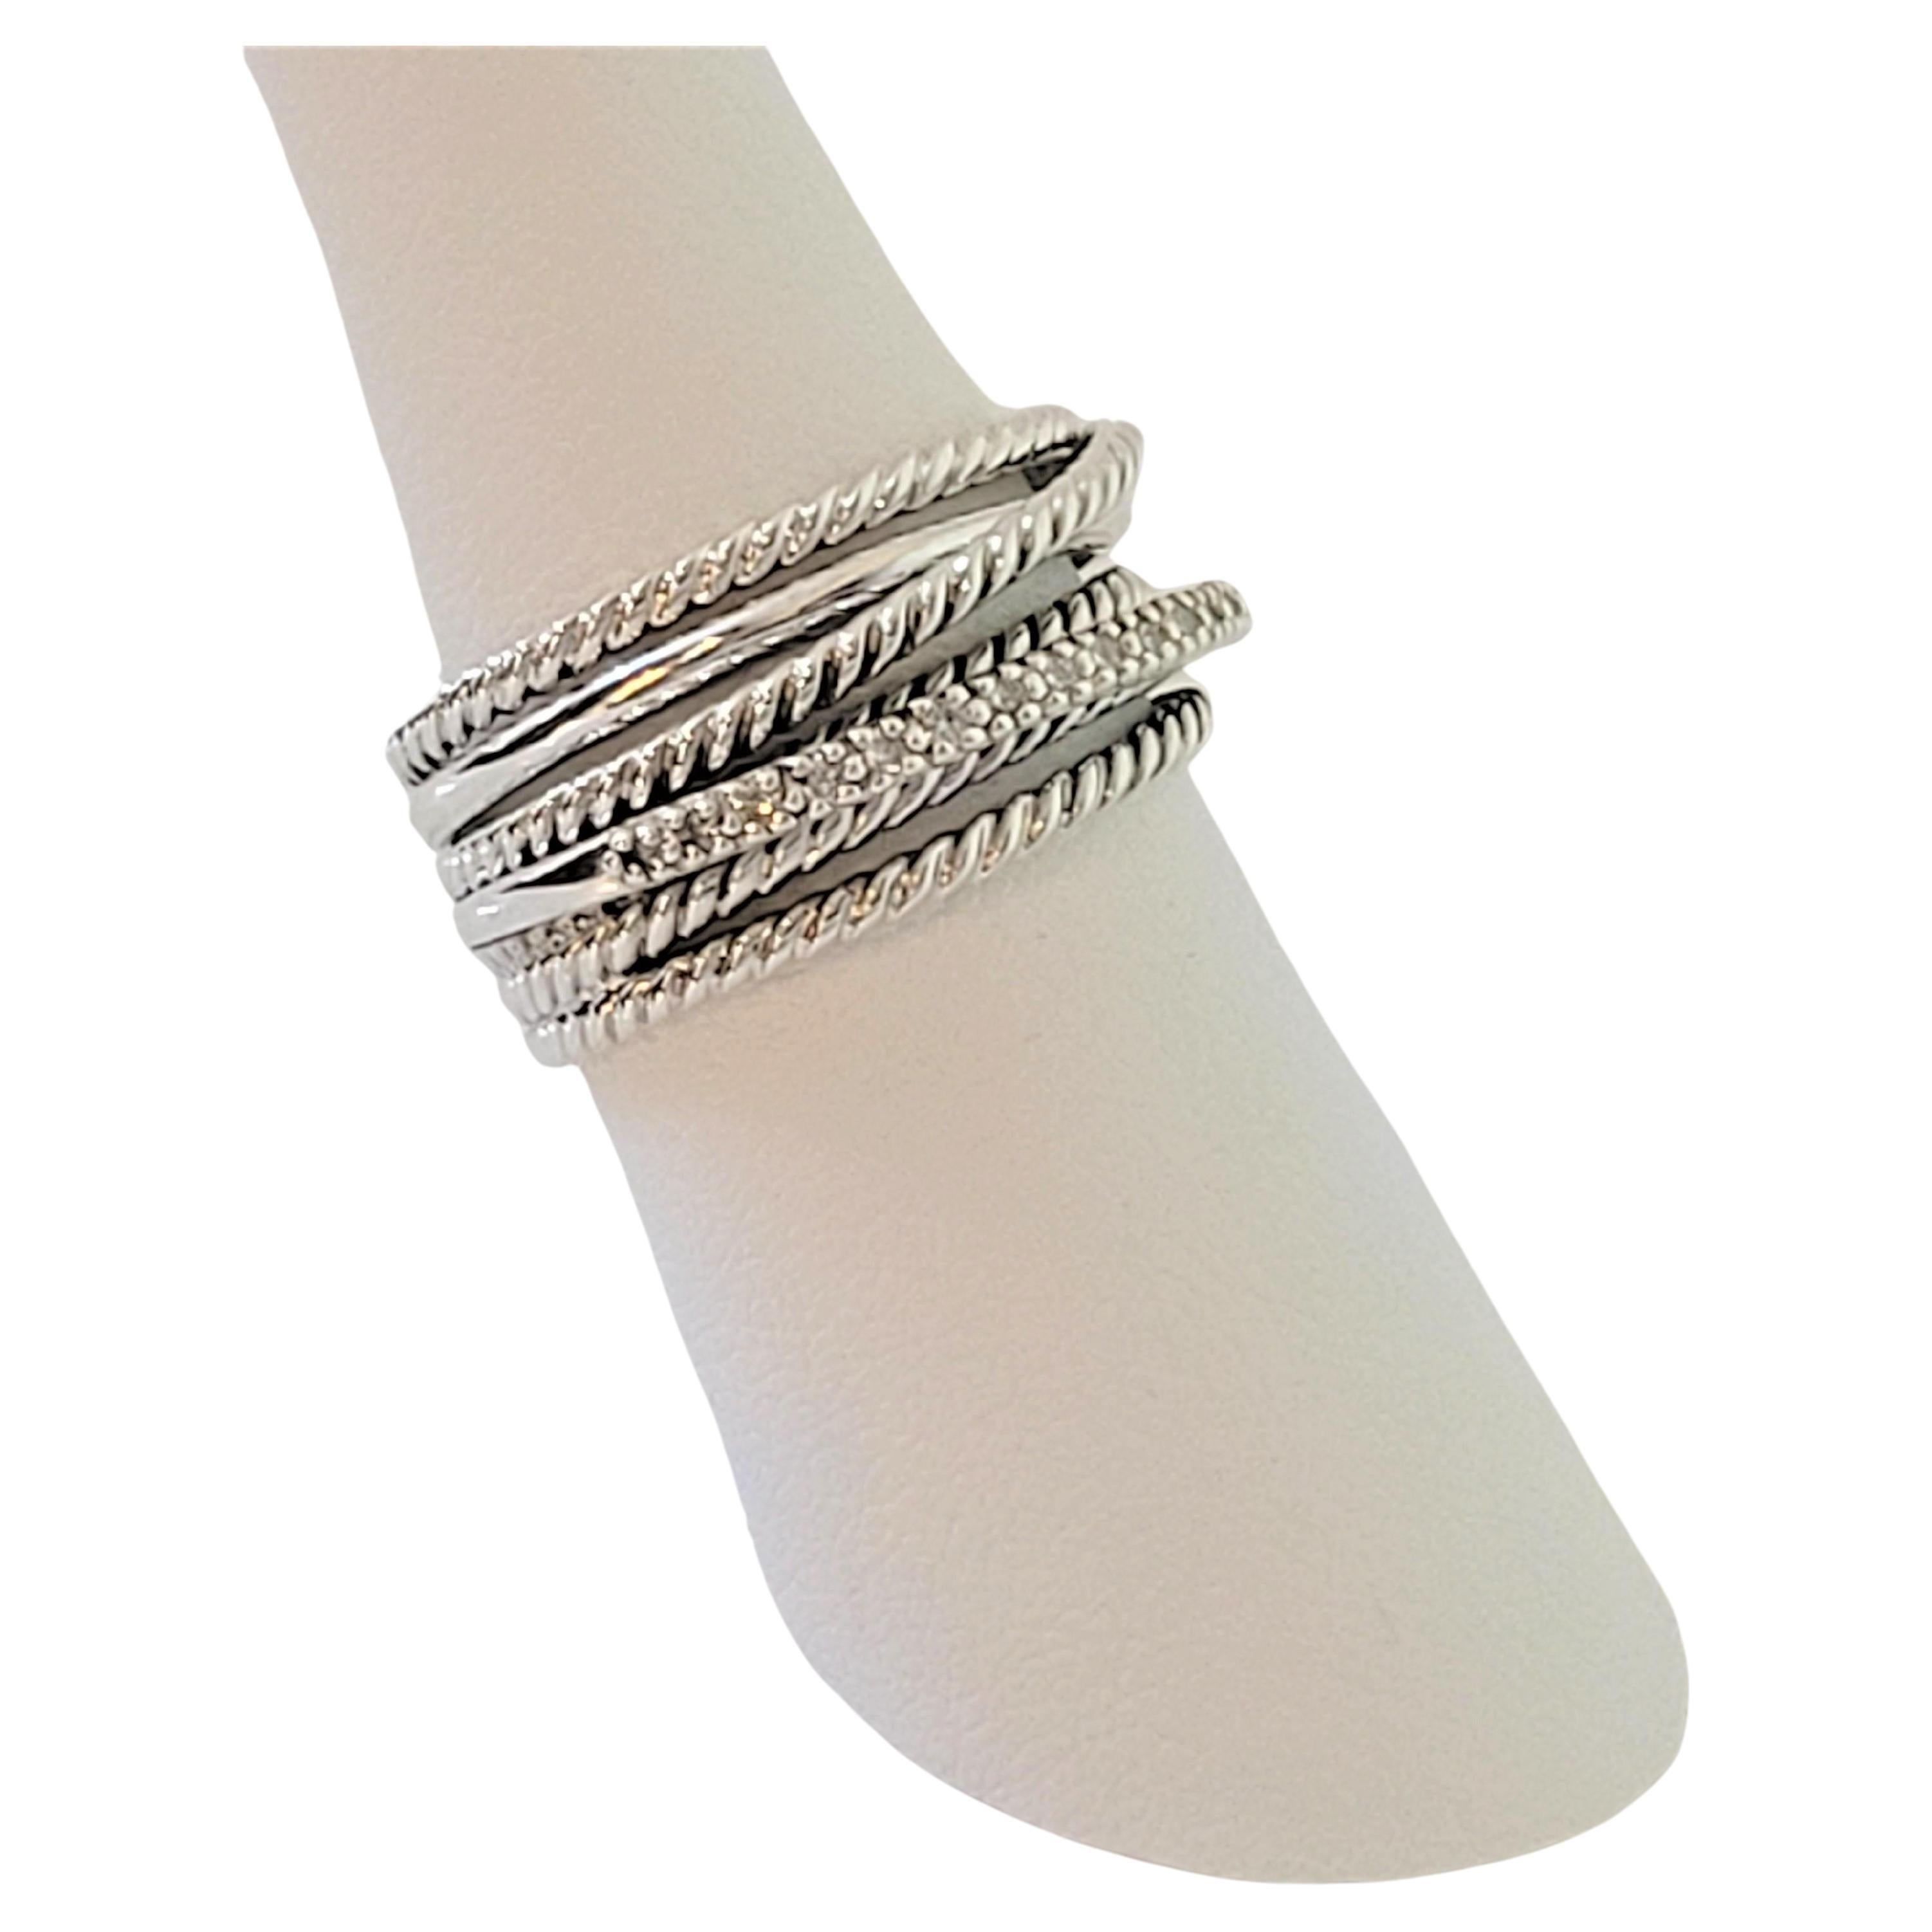 David Yurman Crossover ring 
Material Sterling Silver
Pave-set diamonds 0.18 total carat weight 
The Stamps ''D.Y.'' and ''925''
Weight 7.8gr 
Ring Size 8
Gender women
Condition New, never worn
Comes with David Yurman ring box